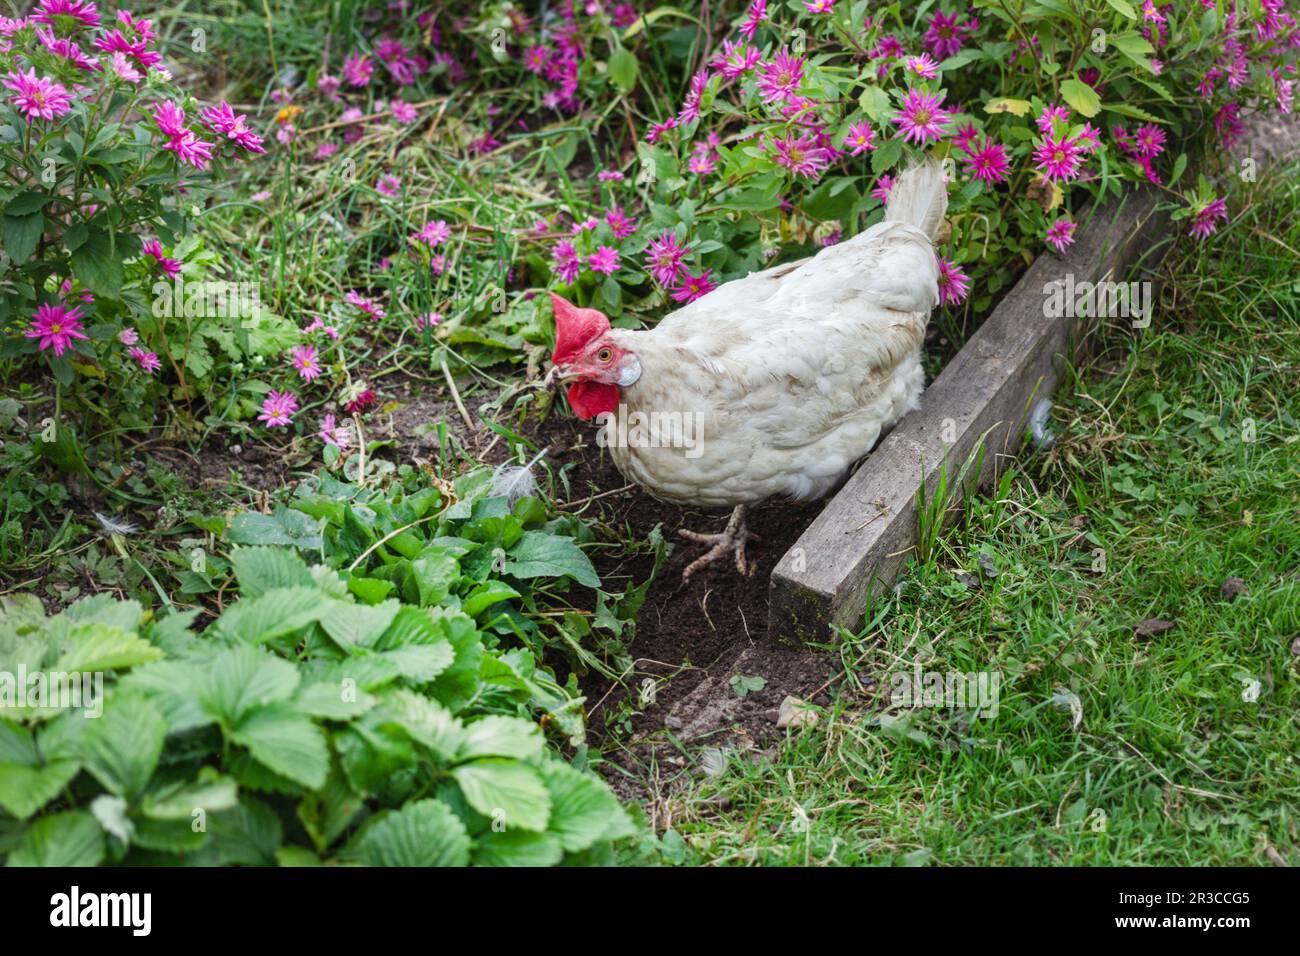 Real adult white chicken in garden among flowers at summer day Stock Photo